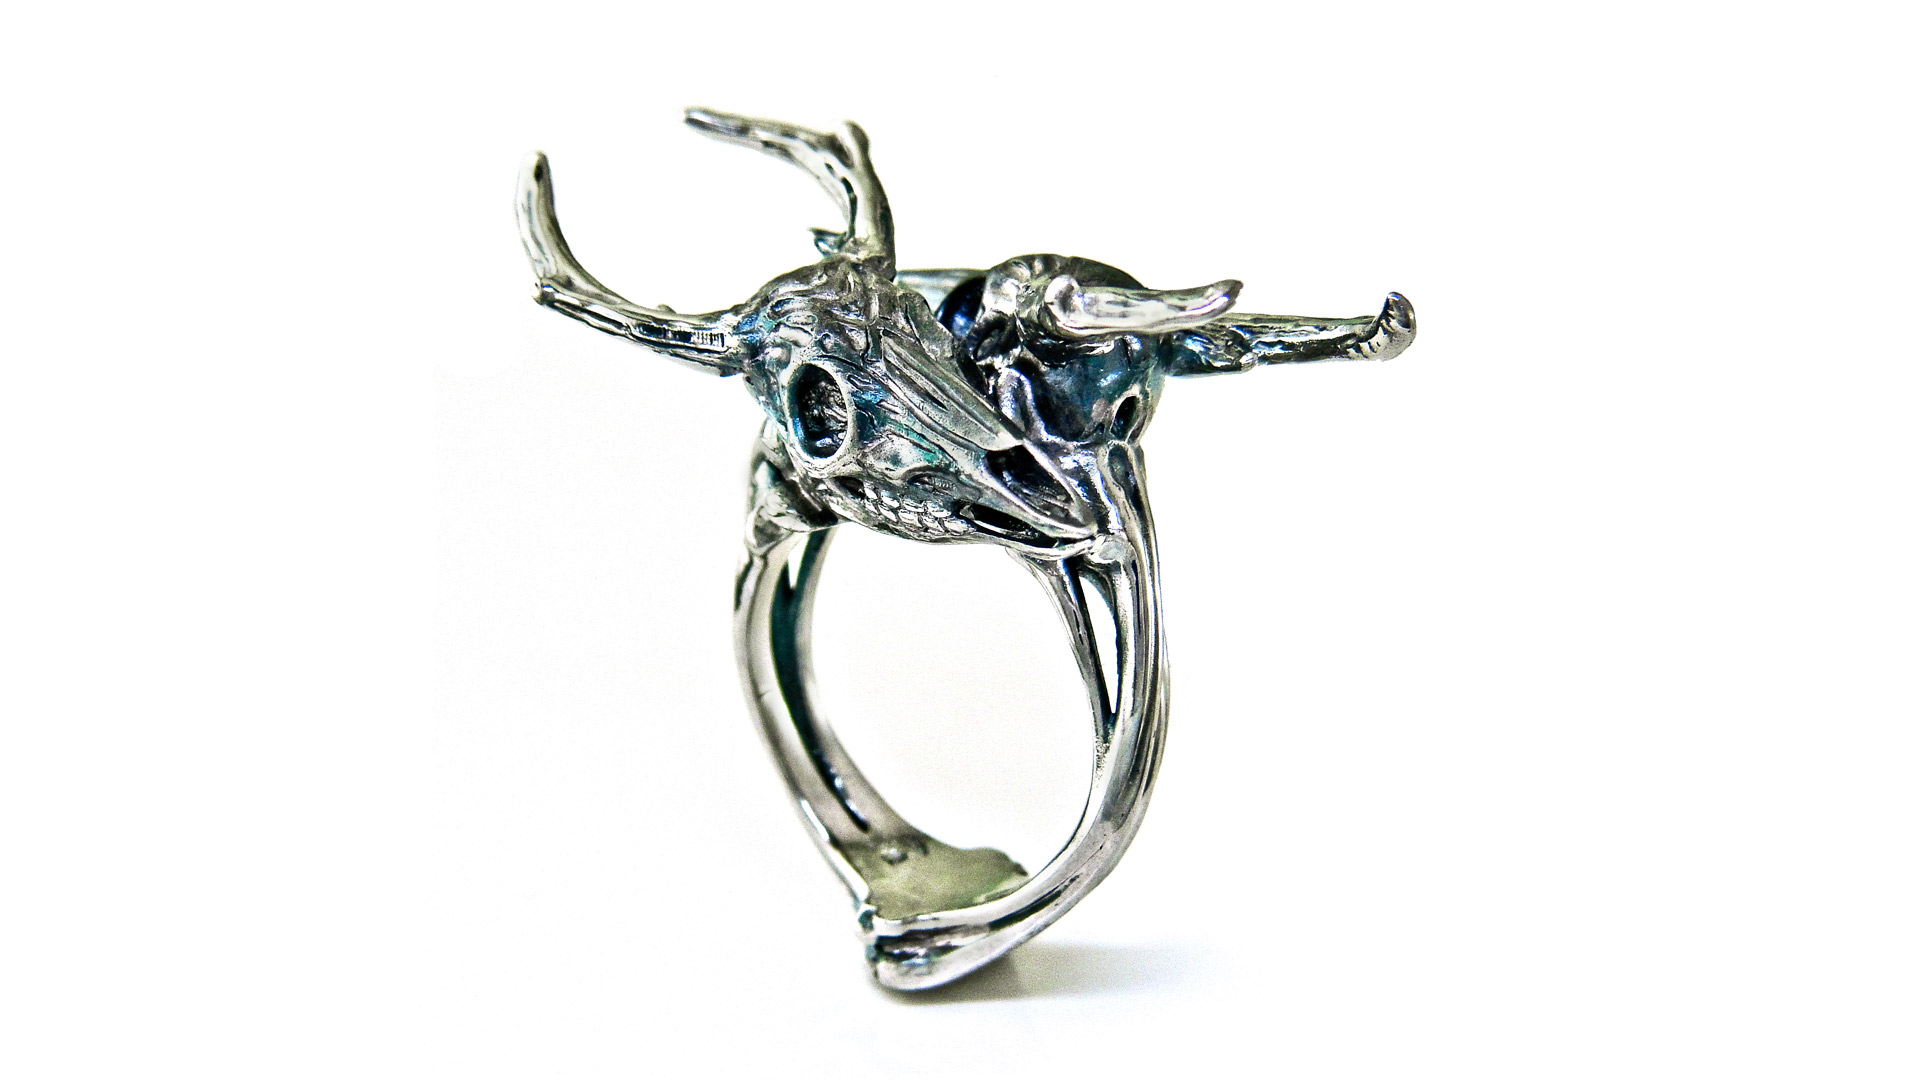 Stags ring by Tomas Wittelsbach